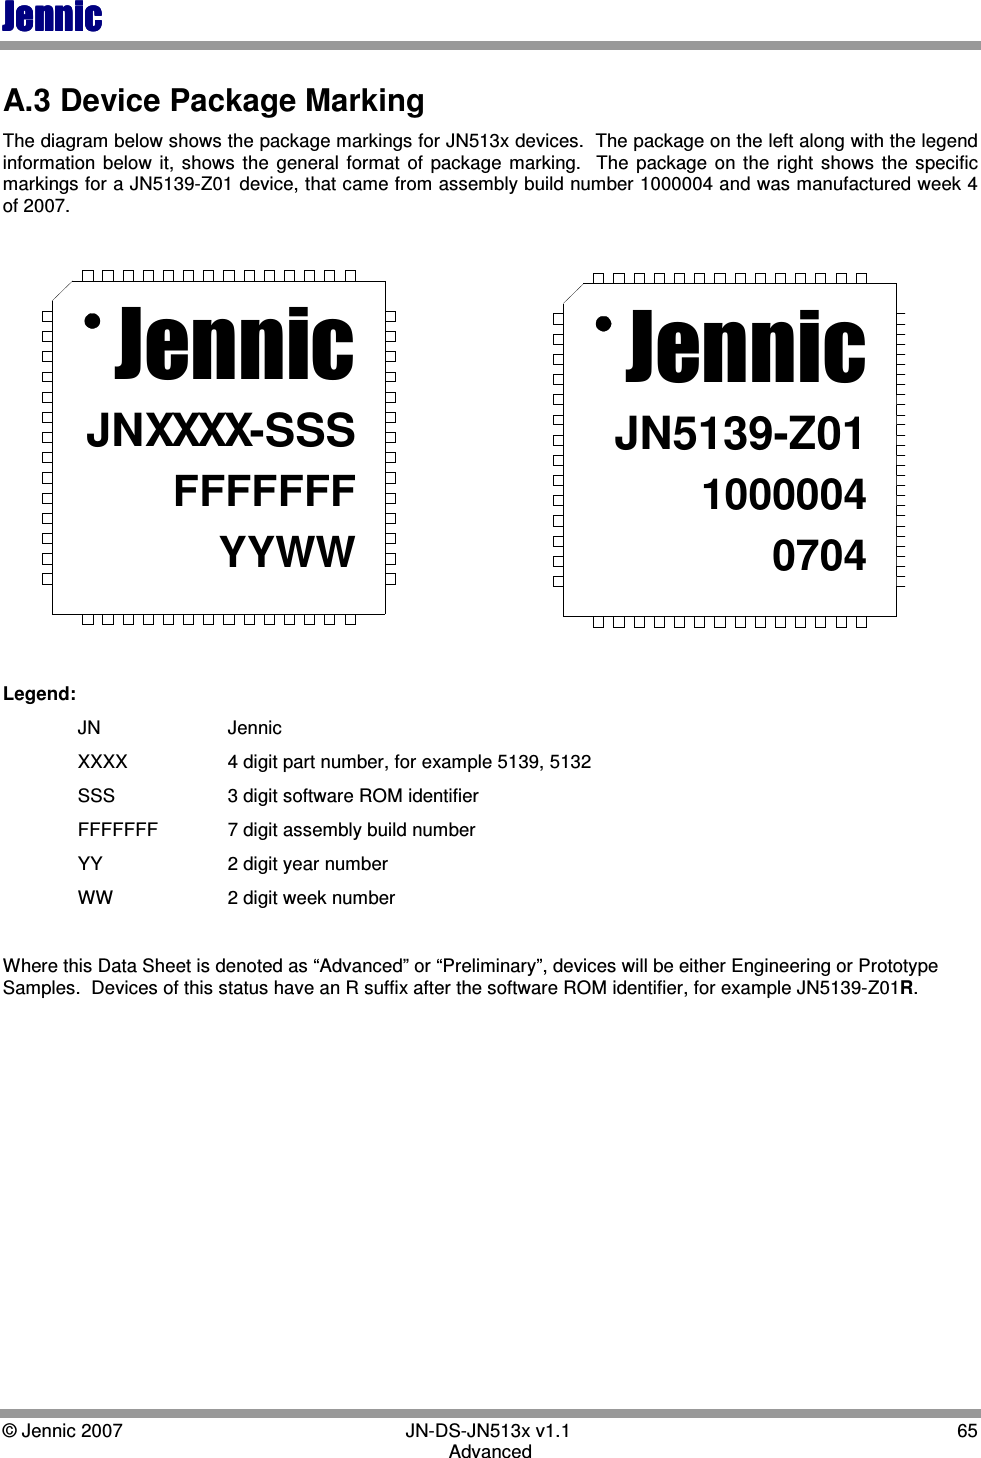 JennicJennicJennicJennic    © Jennic 2007        JN-DS-JN513x v1.1  65 Advanced A.3 Device Package Marking The diagram below shows the package markings for JN513x devices.  The package on the left along with the legend information  below  it,  shows  the  general  format  of  package  marking.    The  package  on  the  right  shows  the  specific markings for a JN5139-Z01 device, that came from assembly build number 1000004 and was manufactured week 4 of 2007.  JennicJNXXXX-SSSFFFFFFFYYWWJennicJN5139-Z0110000040704 Legend:   JN    Jennic   XXXX    4 digit part number, for example 5139, 5132   SSS    3 digit software ROM identifier   FFFFFFF  7 digit assembly build number   YY    2 digit year number   WW    2 digit week number  Where this Data Sheet is denoted as “Advanced” or “Preliminary”, devices will be either Engineering or Prototype Samples.  Devices of this status have an R suffix after the software ROM identifier, for example JN5139-Z01R. 